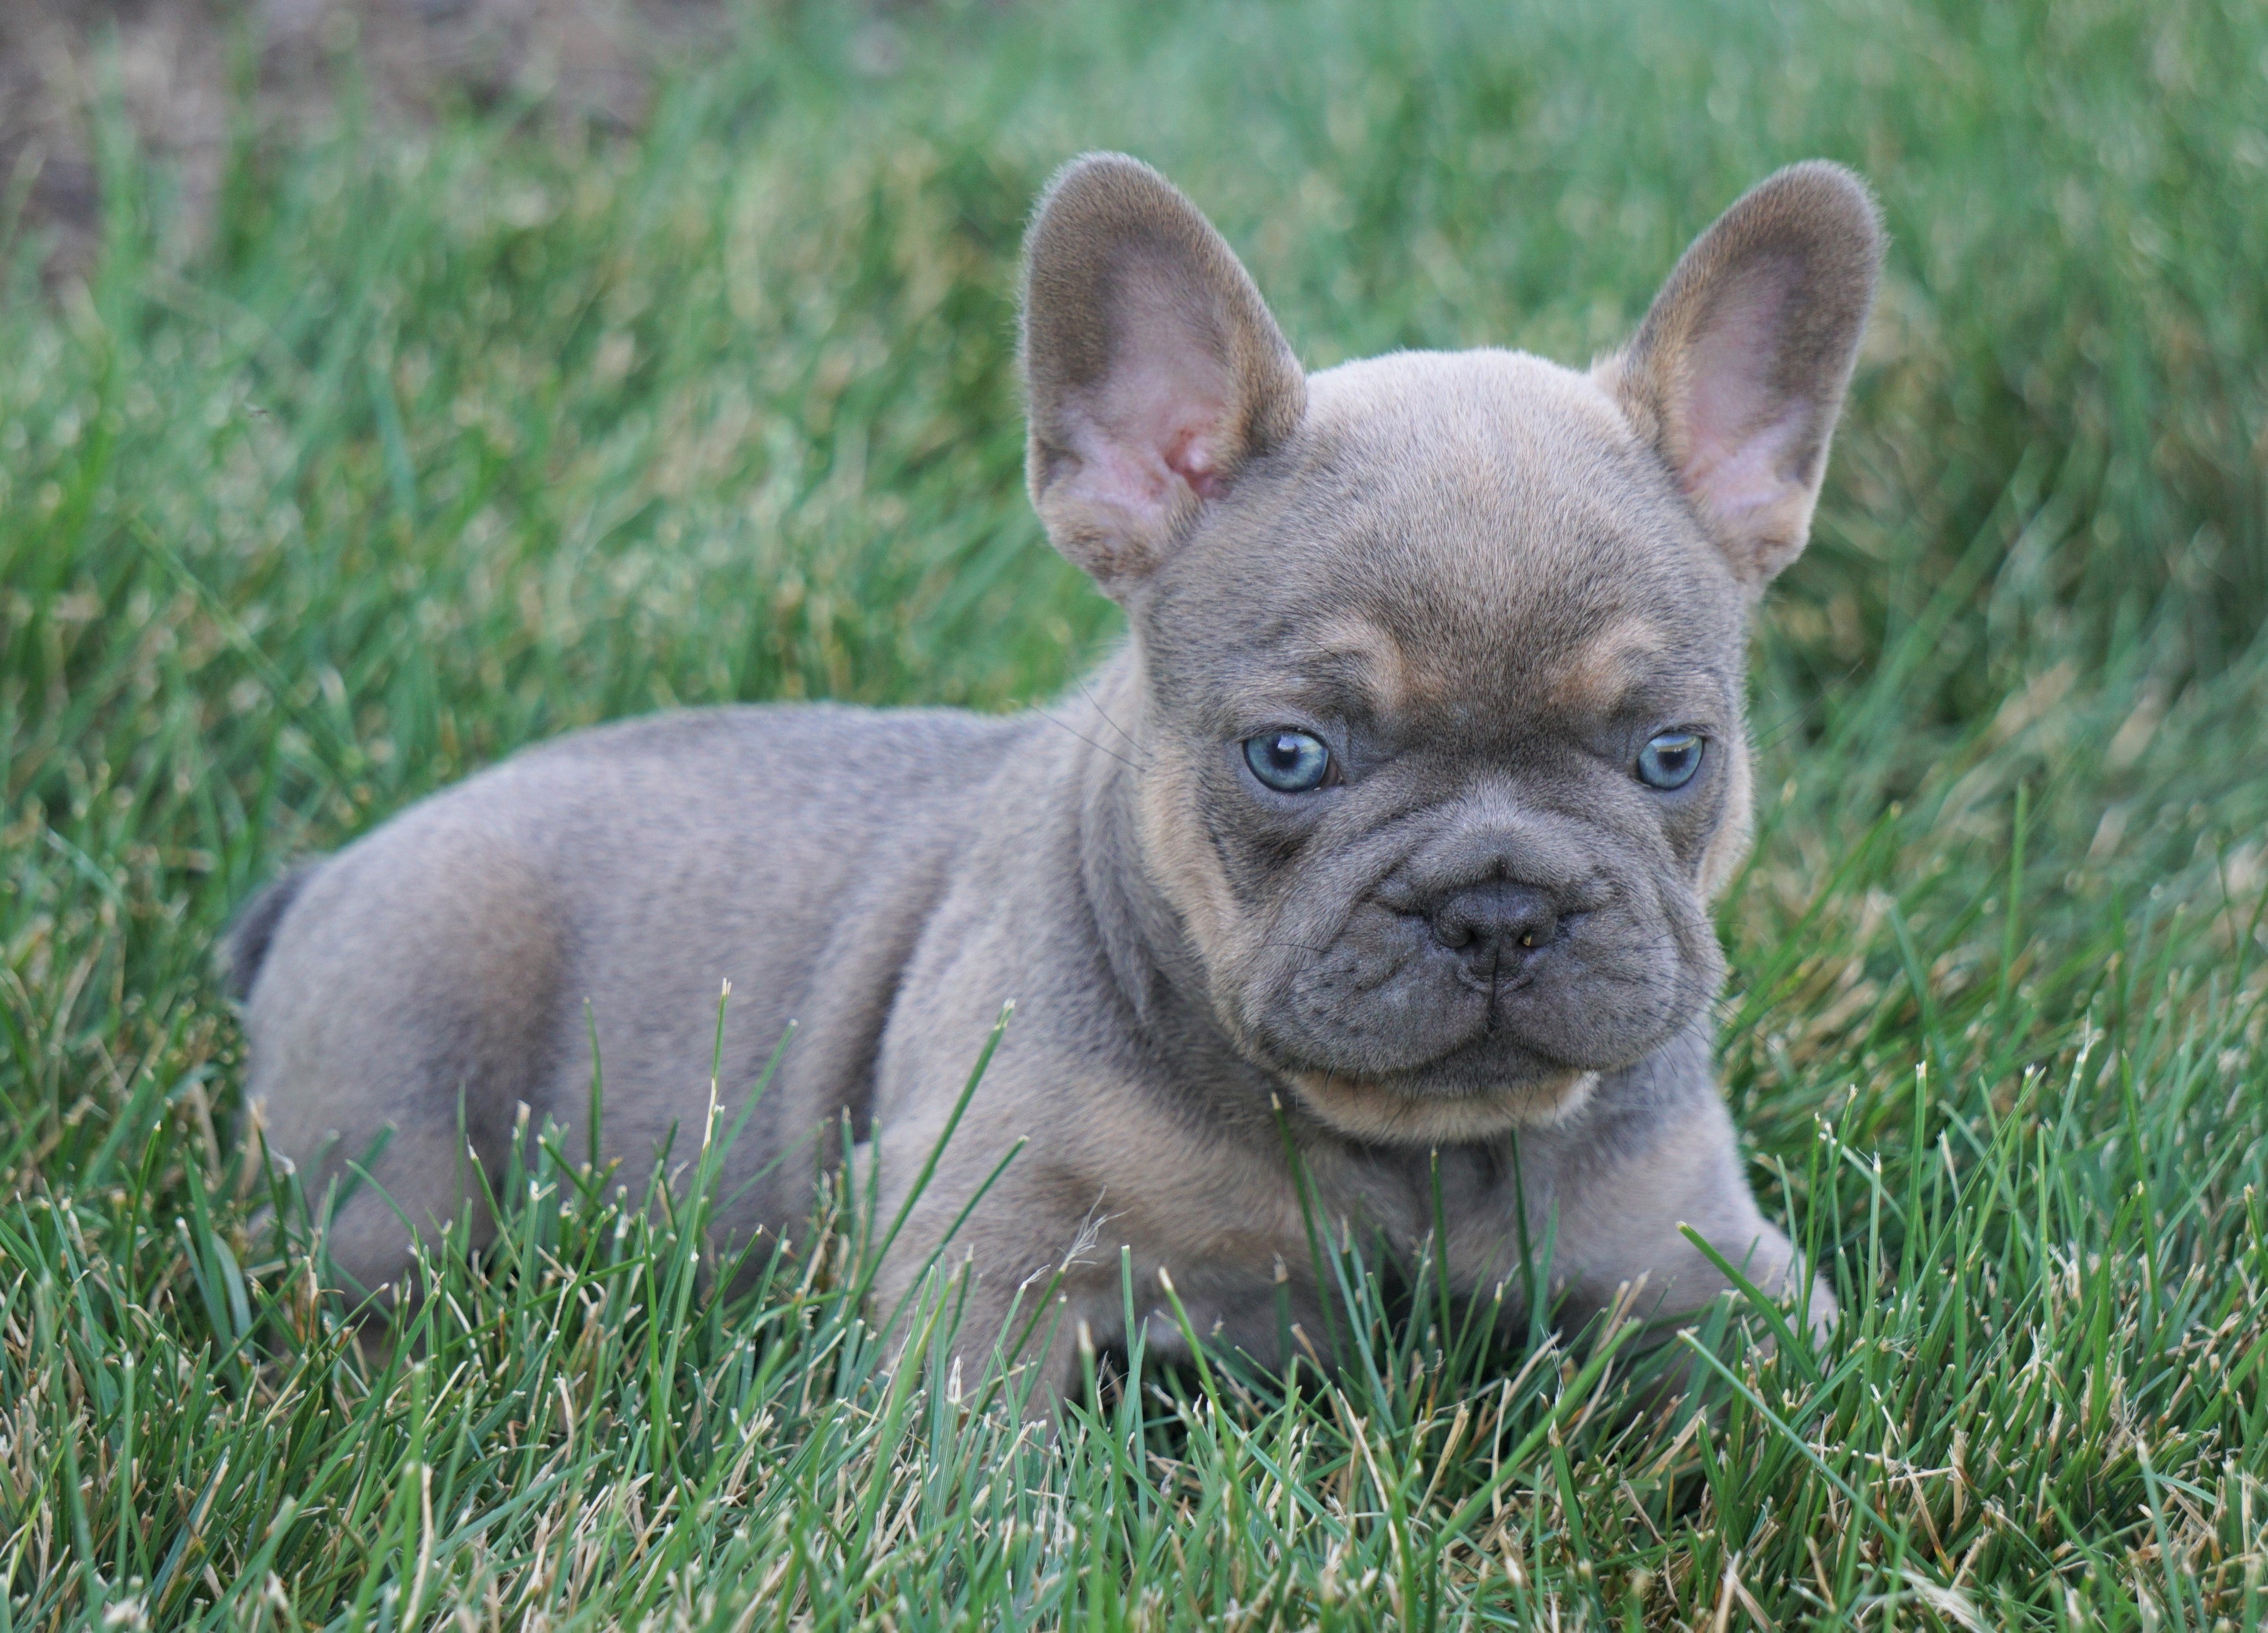 Top Akc French Bulldog For Sale in the world Don t miss out | bulldogs